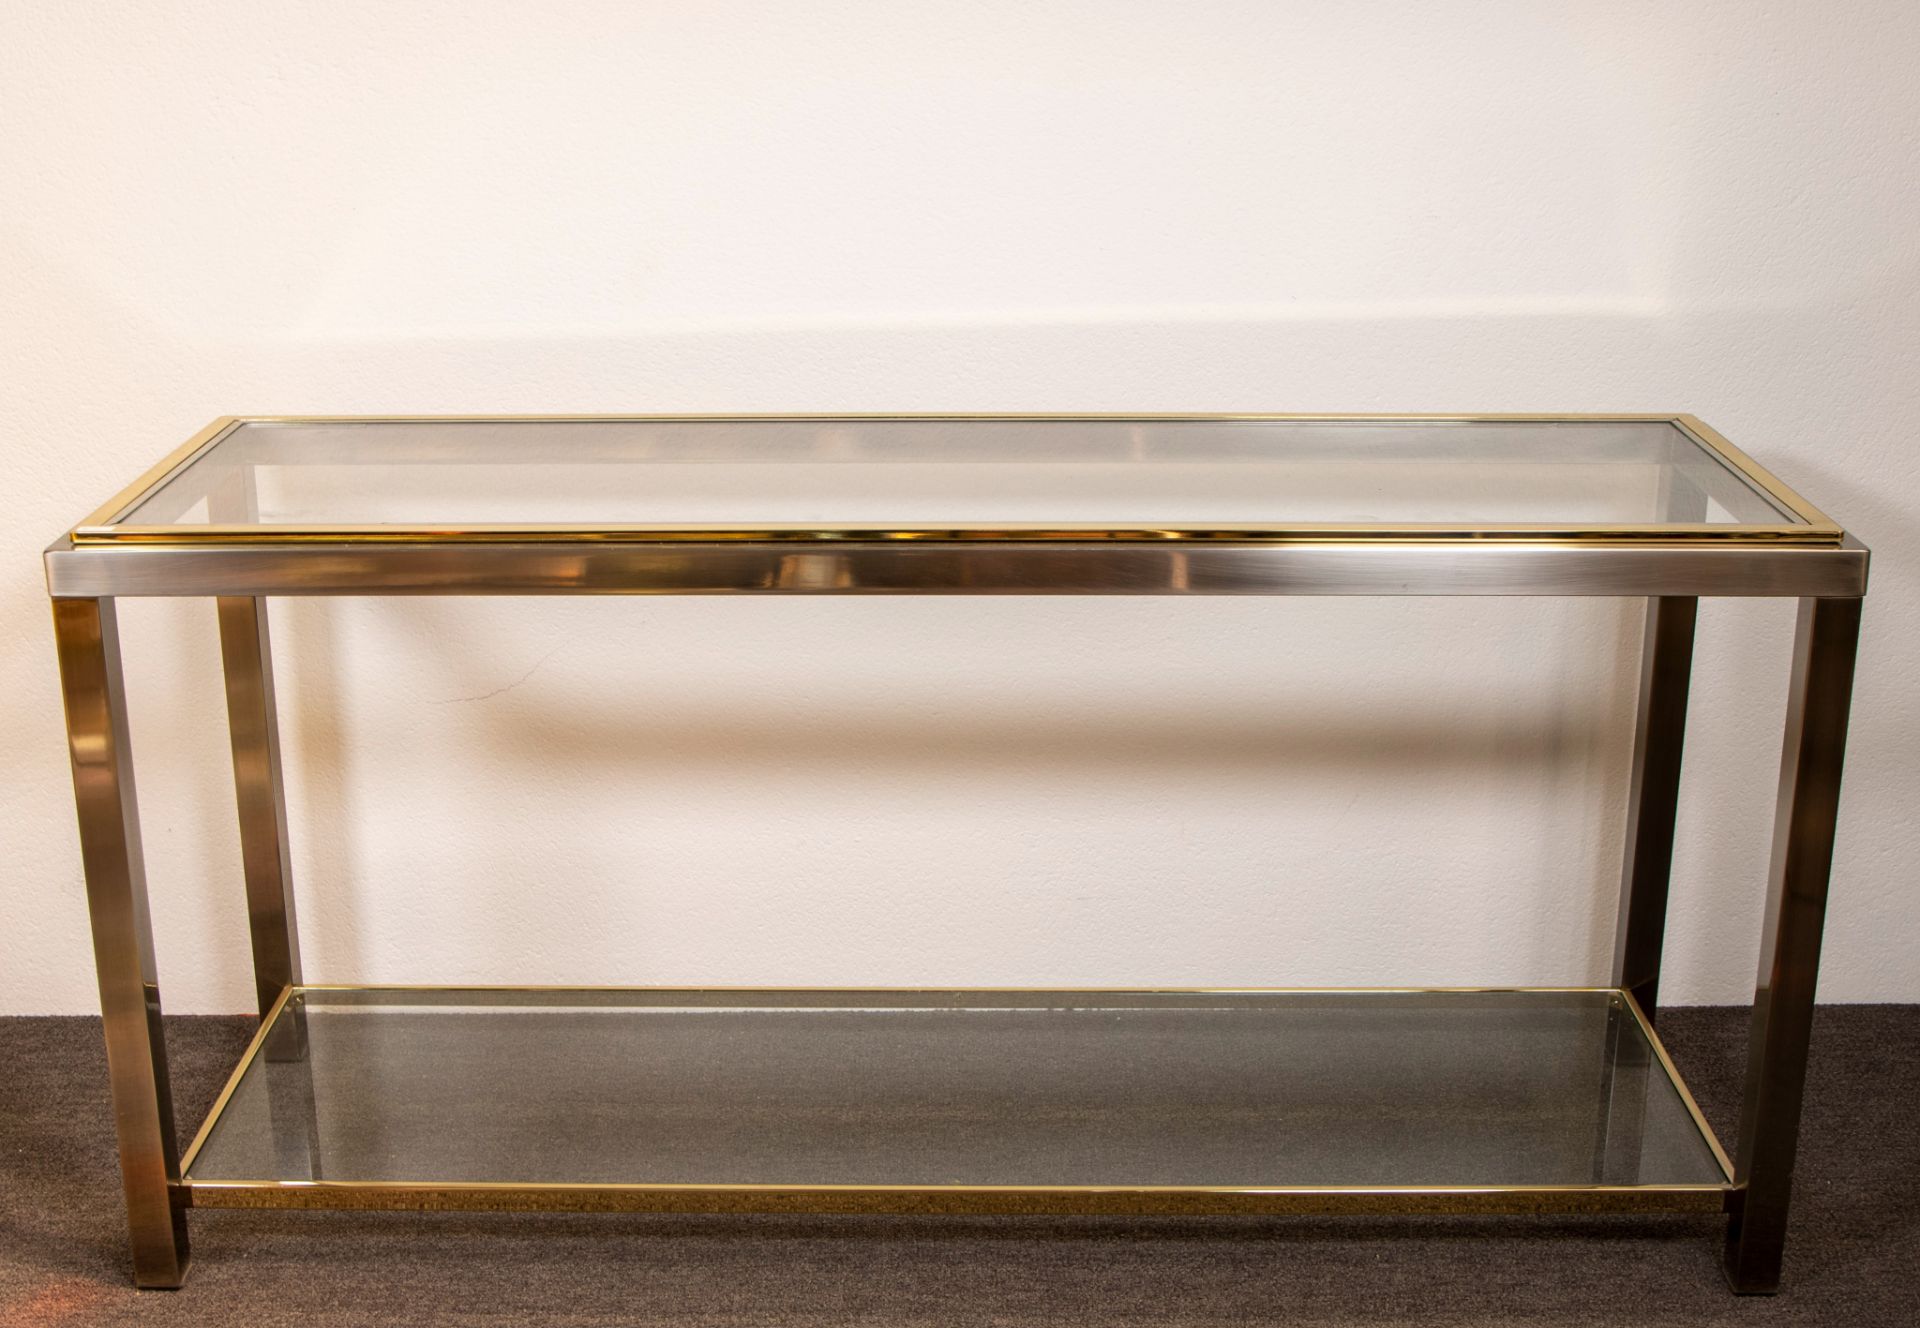 Belgo Chrom console, steel and brass with clear glass